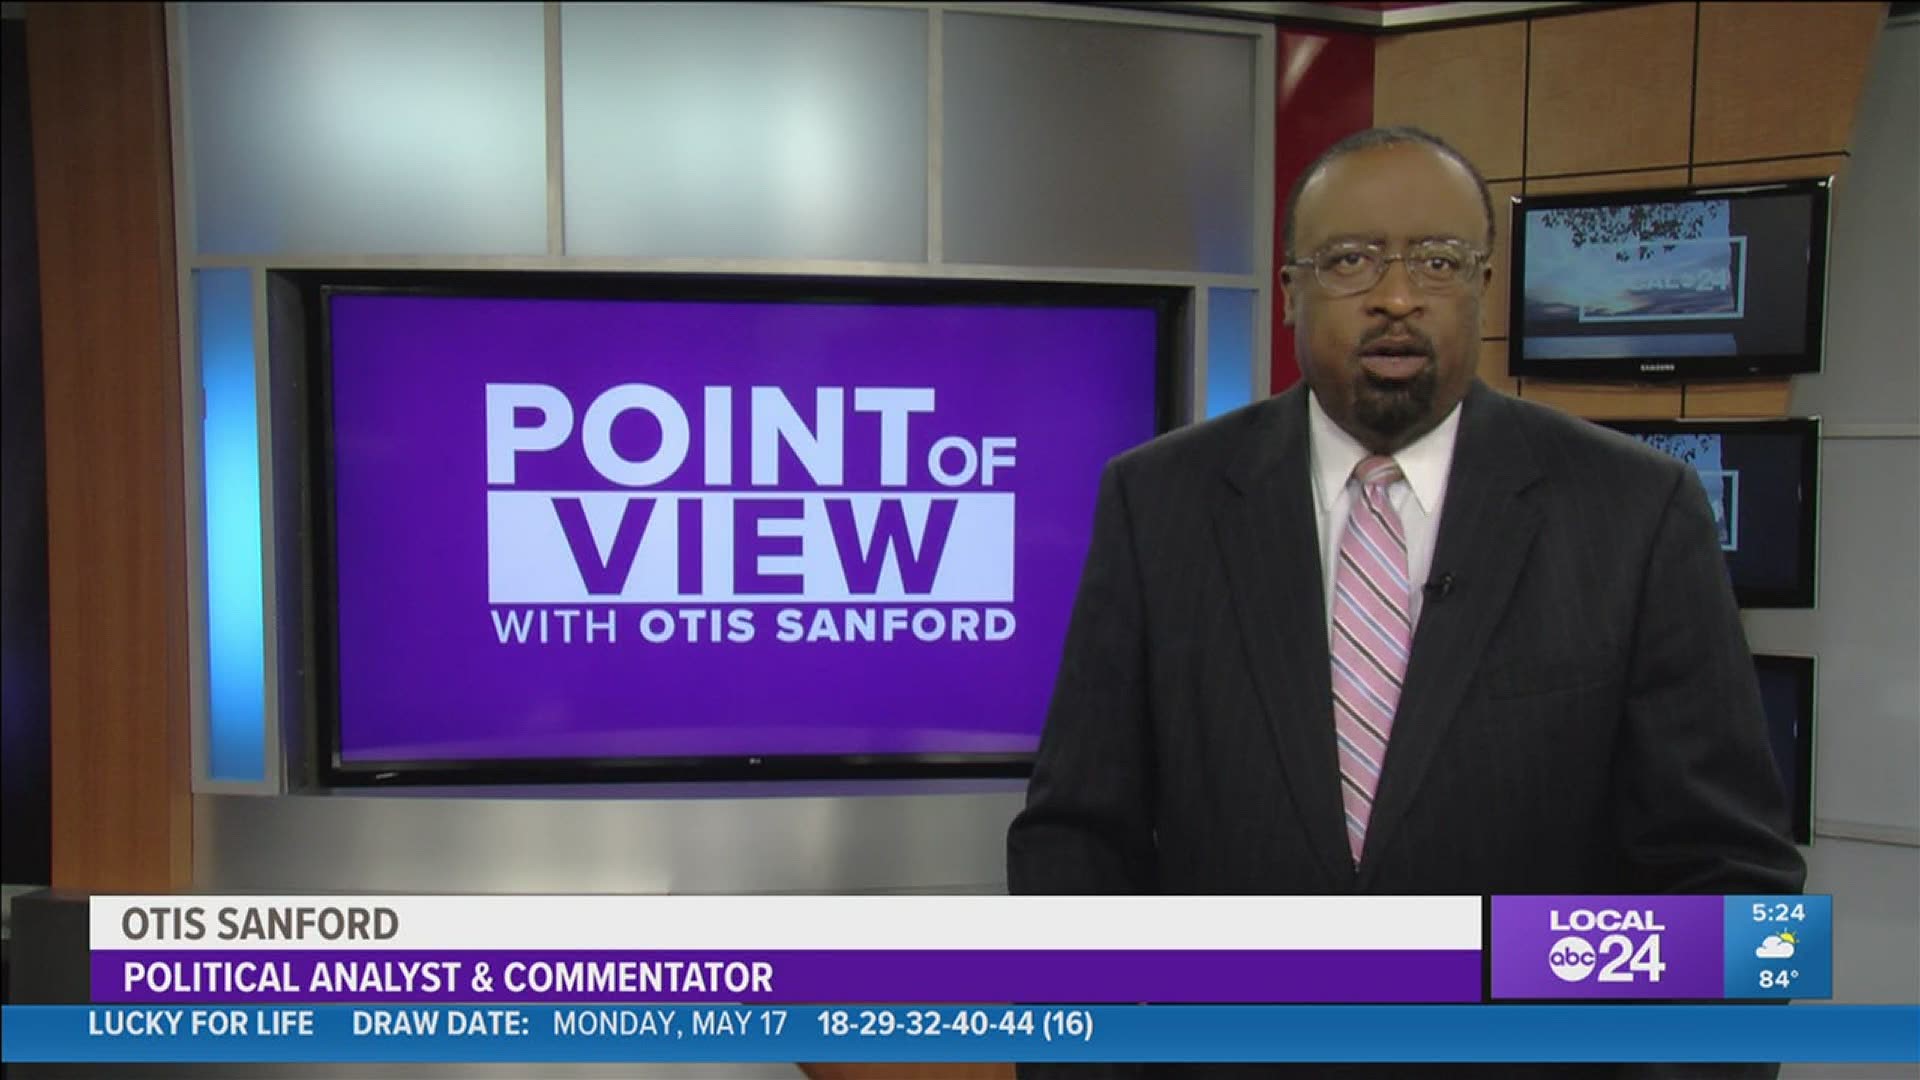 Local 24 News political analyst and commentator Otis Sanford shares his point of view on a ban on teaching critical race theory in Tennessee.